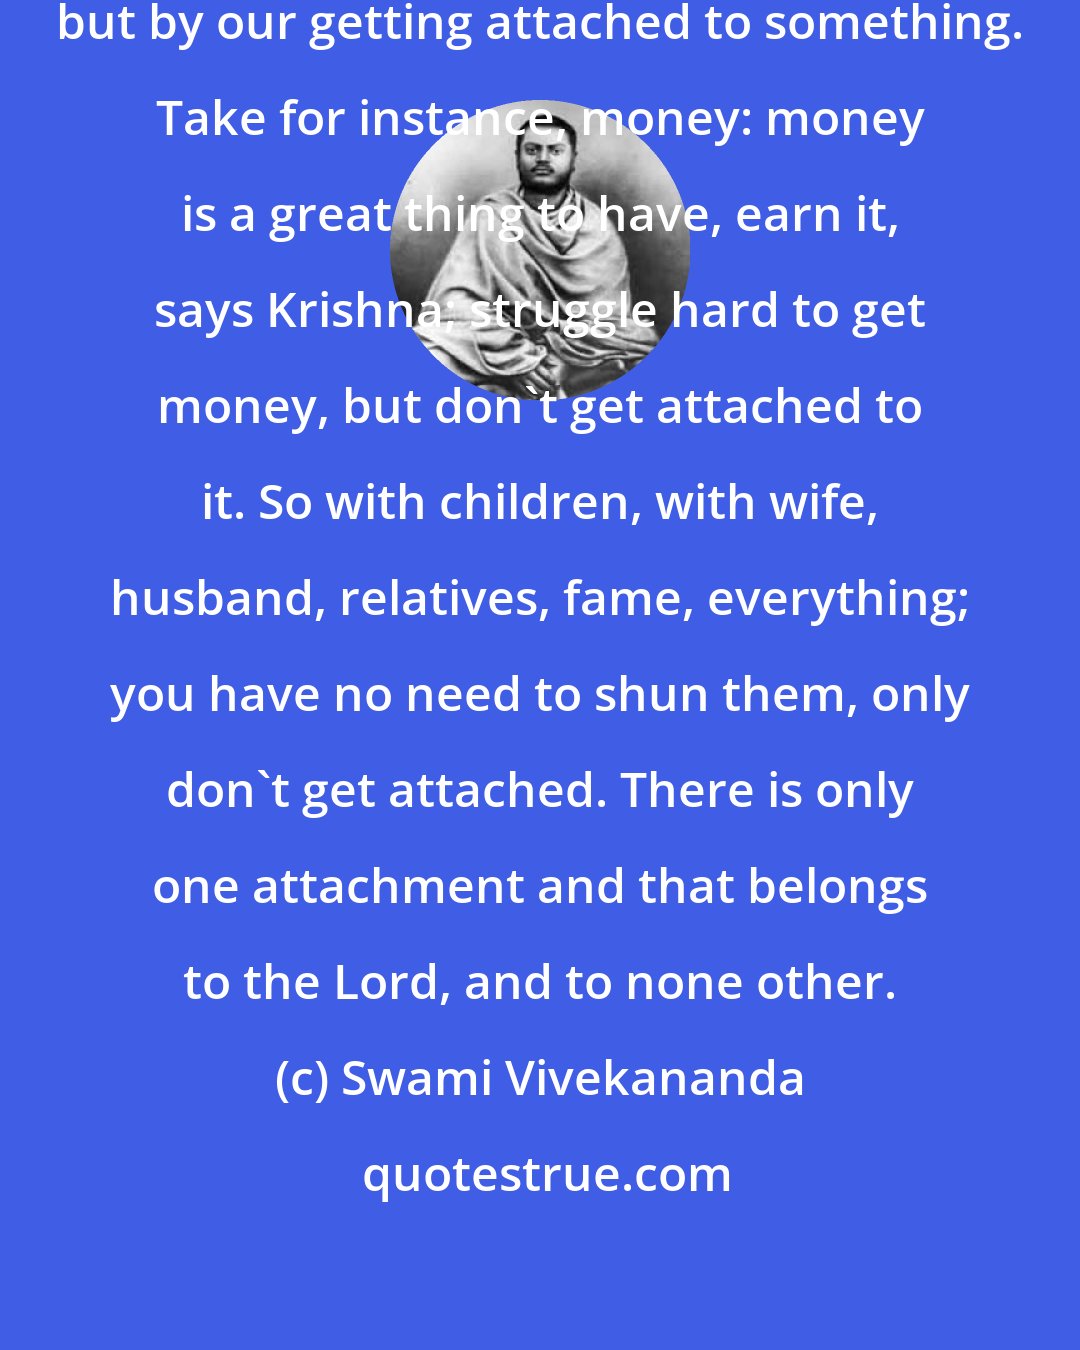 Swami Vivekananda: Our misery comes, not from work, but by our getting attached to something. Take for instance, money: money is a great thing to have, earn it, says Krishna; struggle hard to get money, but don't get attached to it. So with children, with wife, husband, relatives, fame, everything; you have no need to shun them, only don't get attached. There is only one attachment and that belongs to the Lord, and to none other.